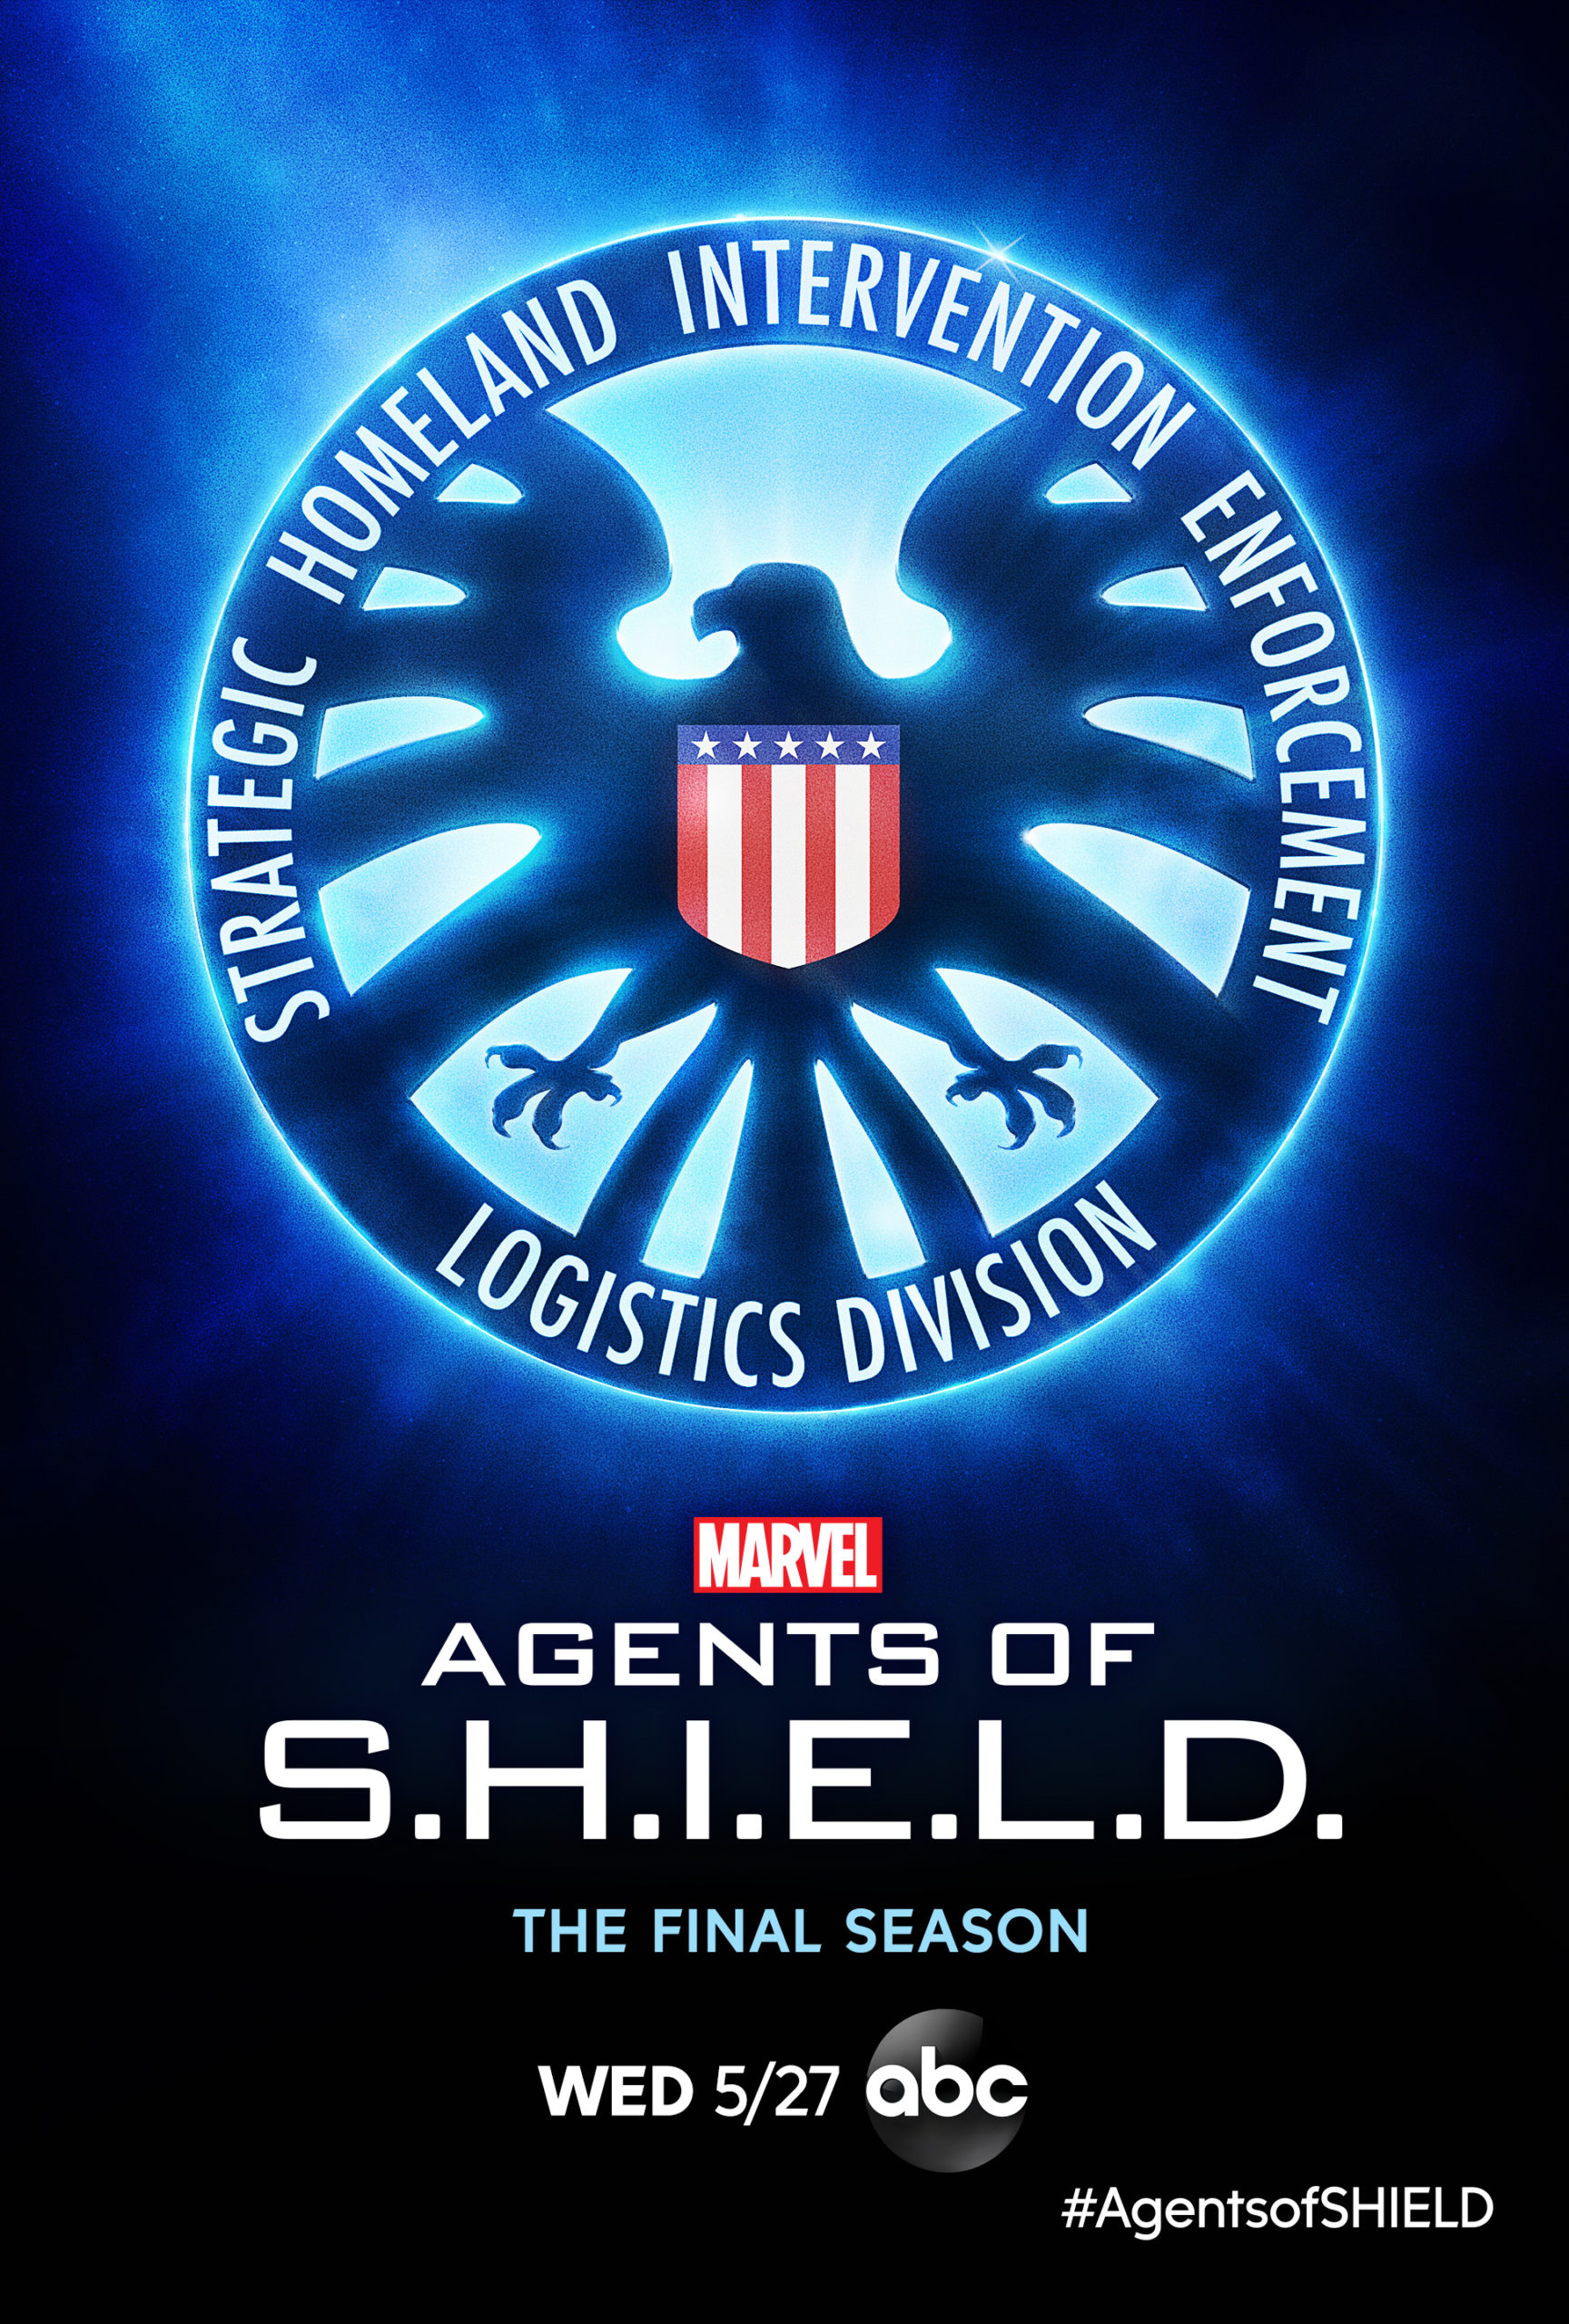 Comic-Con@Home Panel Review:  Science and Agents of SHIELD